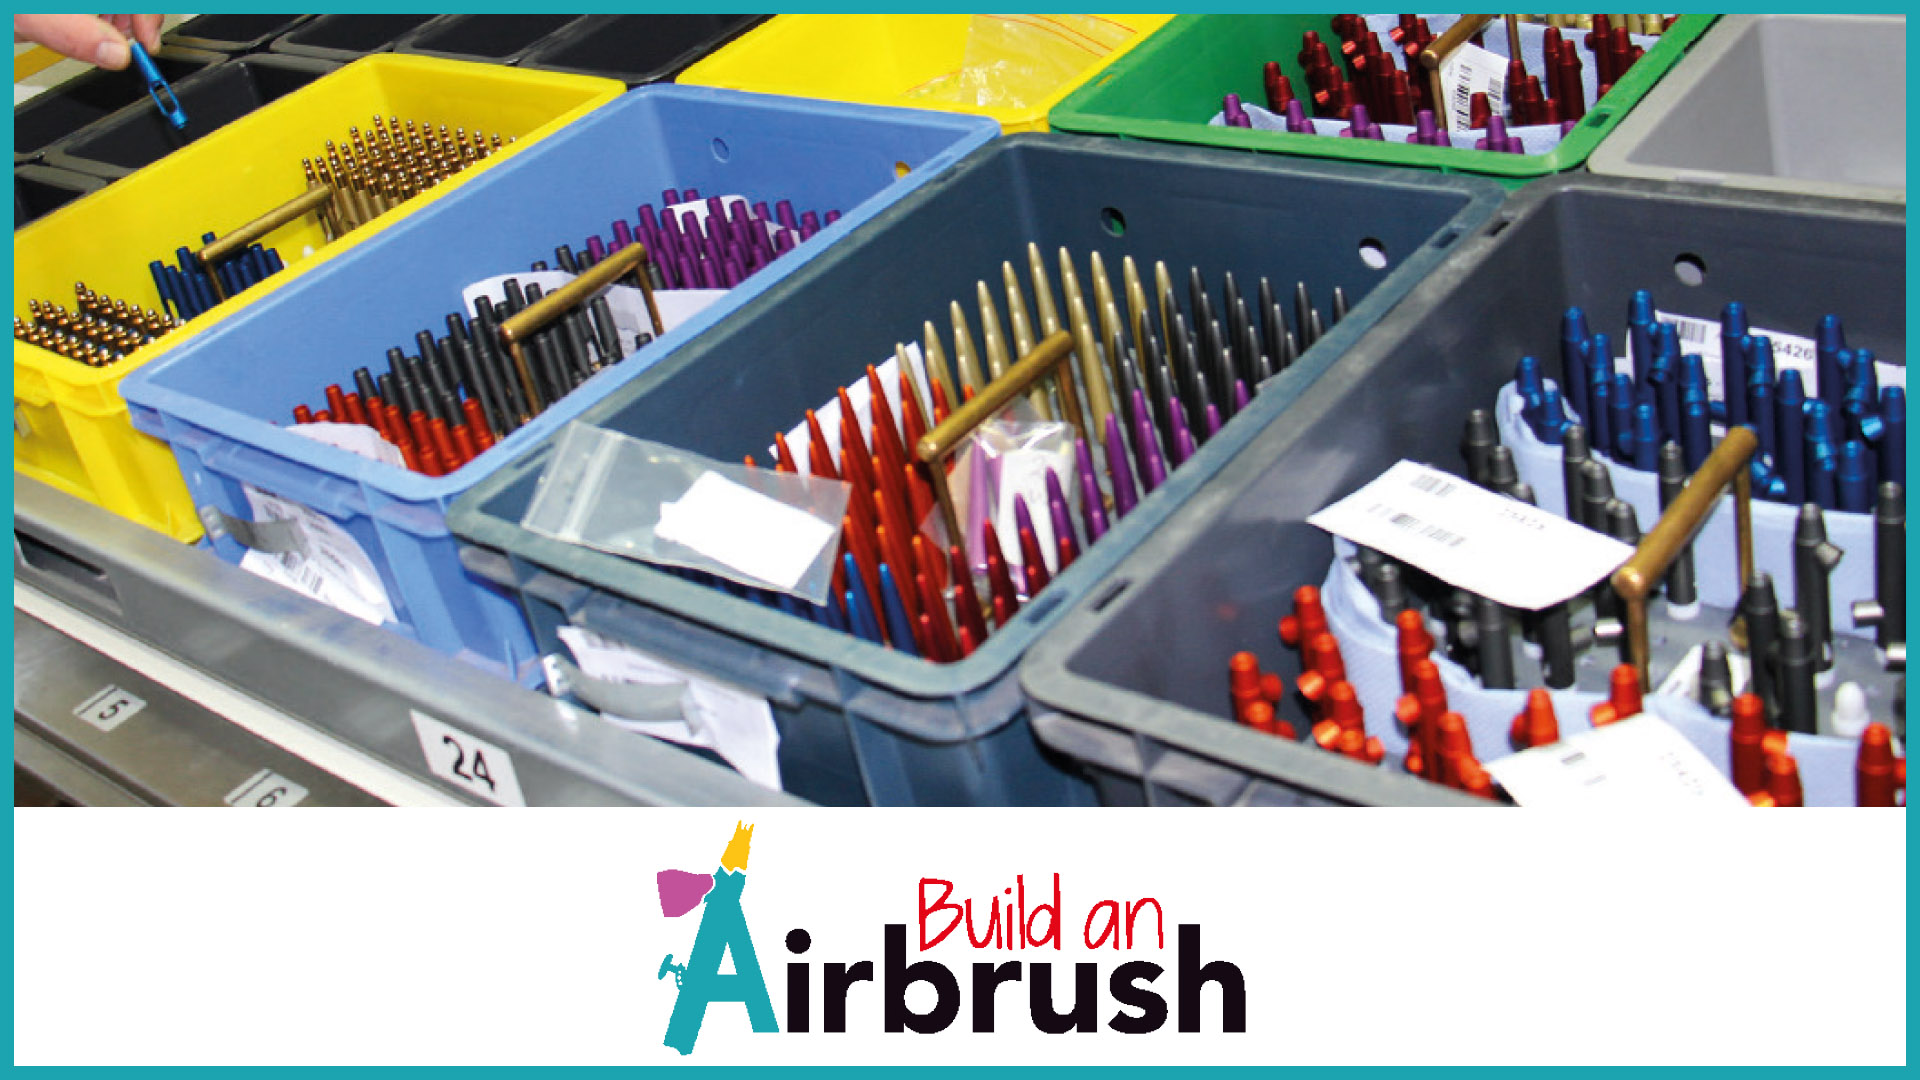 „Build an Airbrush“ from H&S